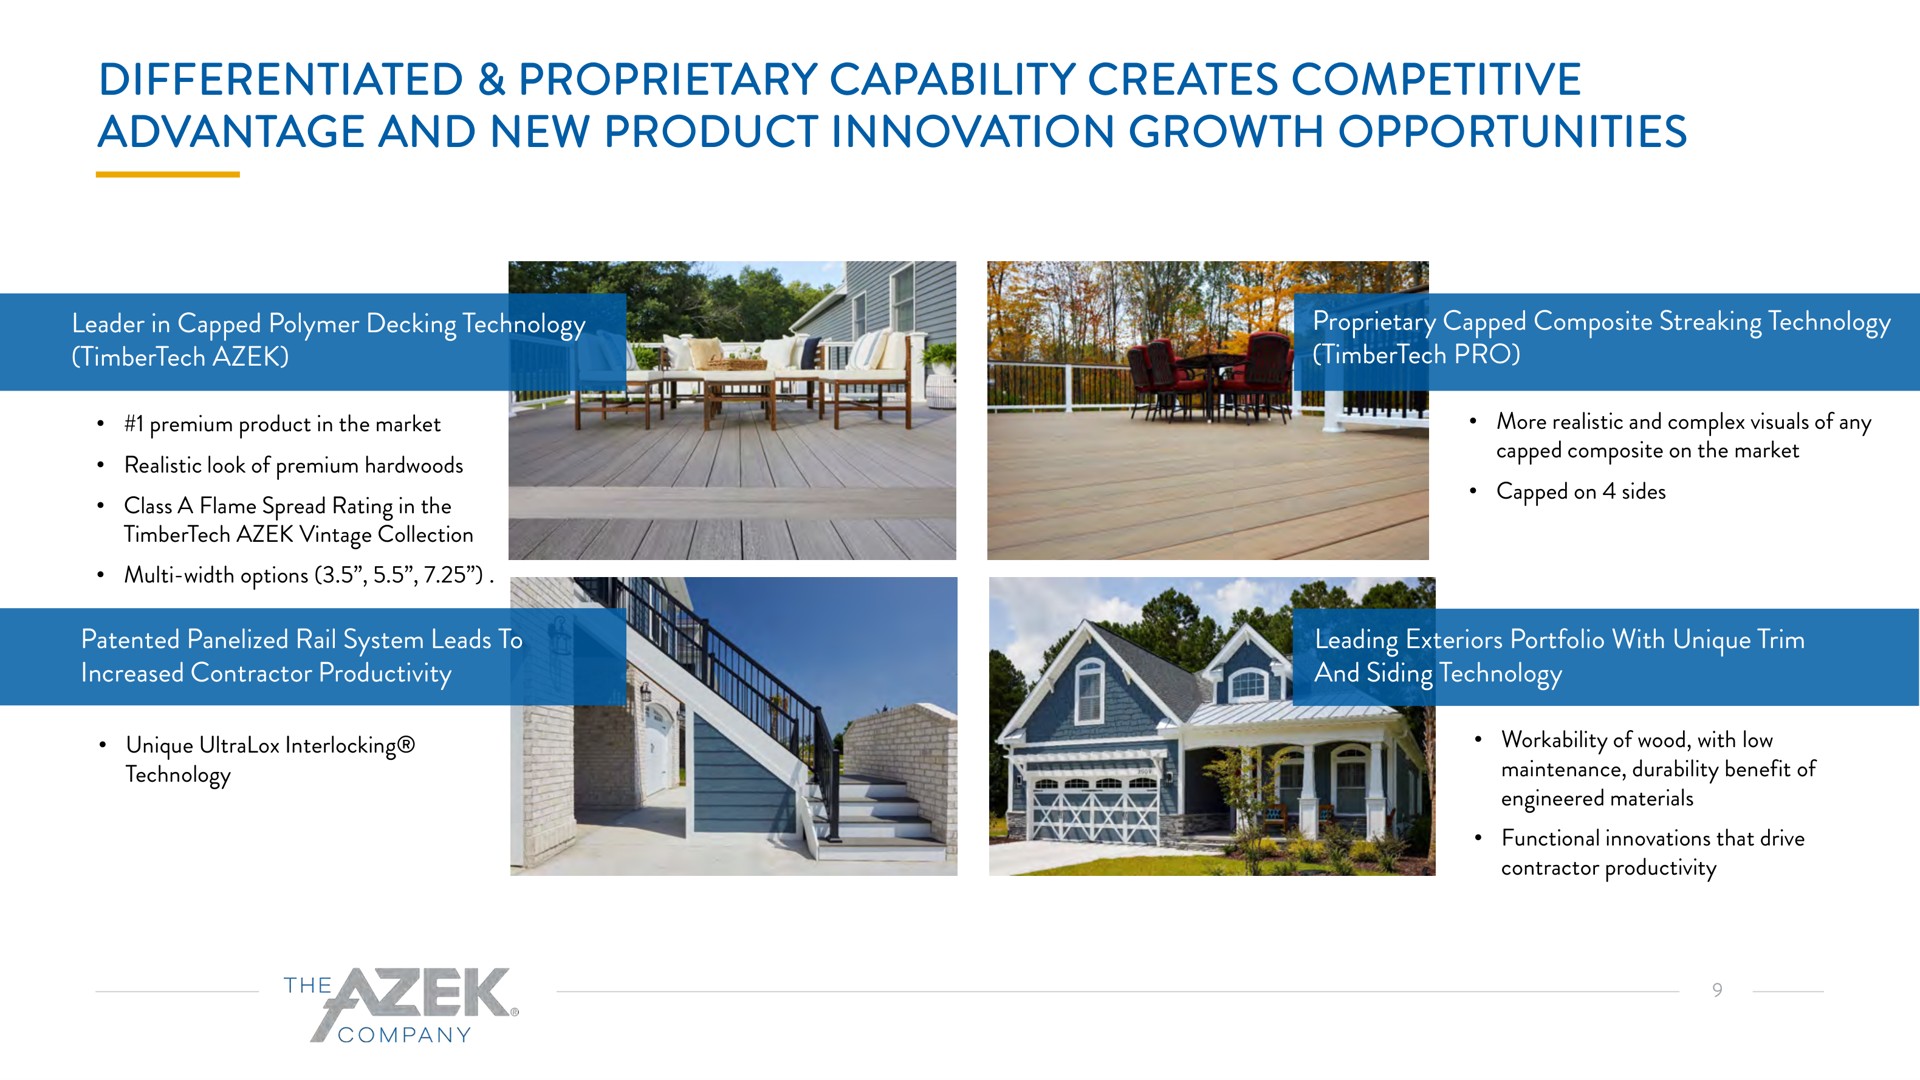 differentiated proprietary capability creates competitive advantage and new product innovation growth opportunities | Azek